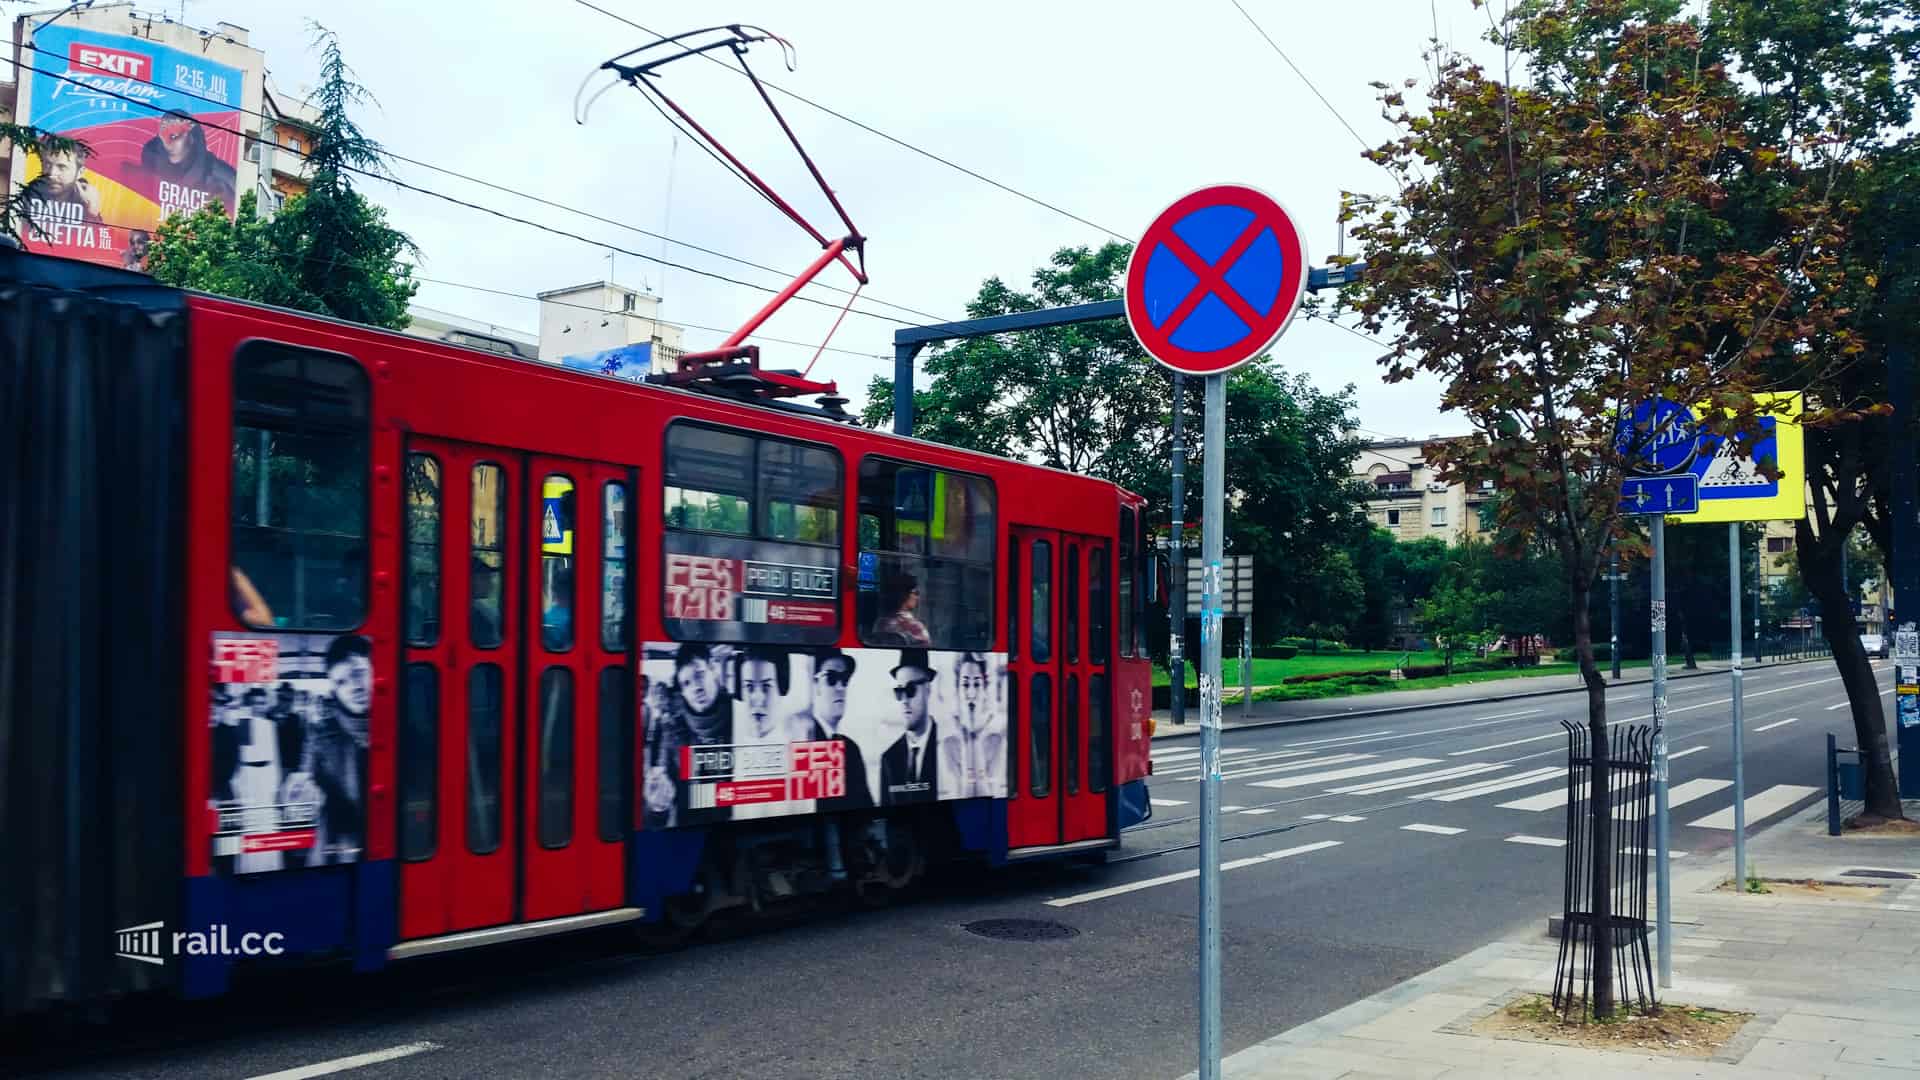 The tram from Belgrade leaves directly in front of the old main station